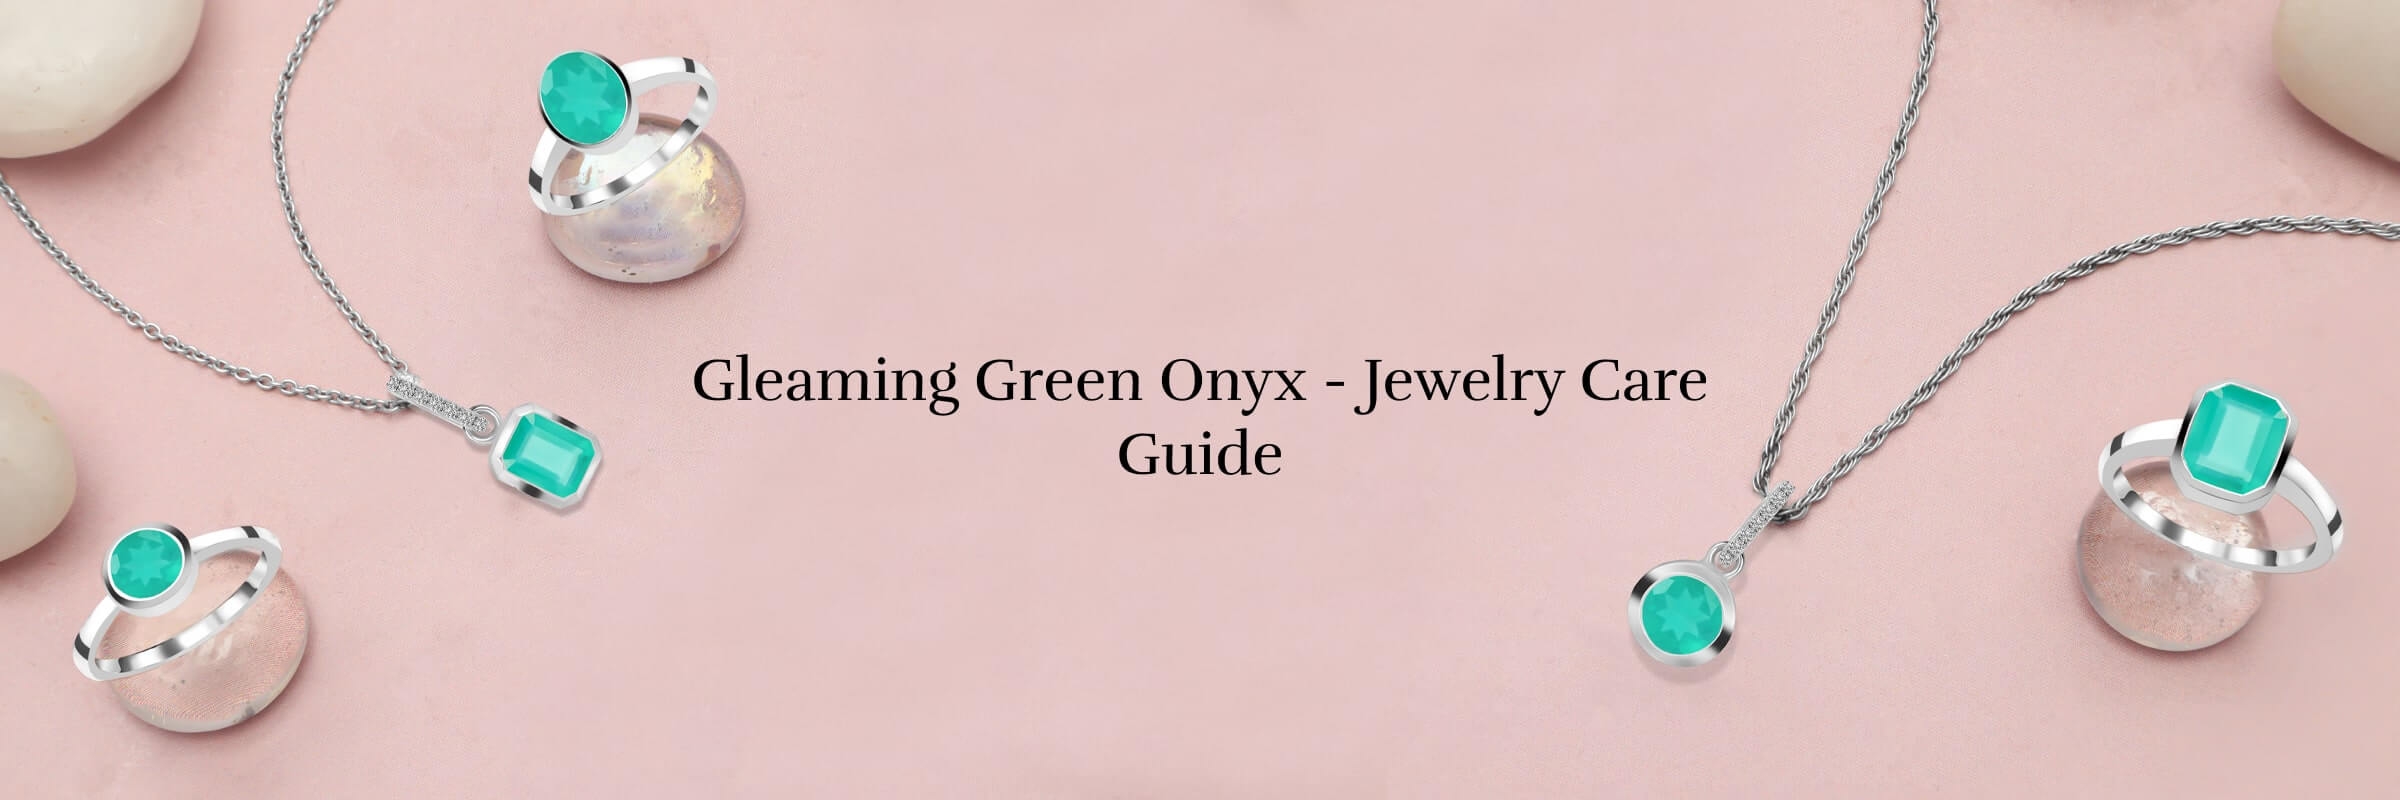 How to Care Your Green Onyx Casting Jewelry